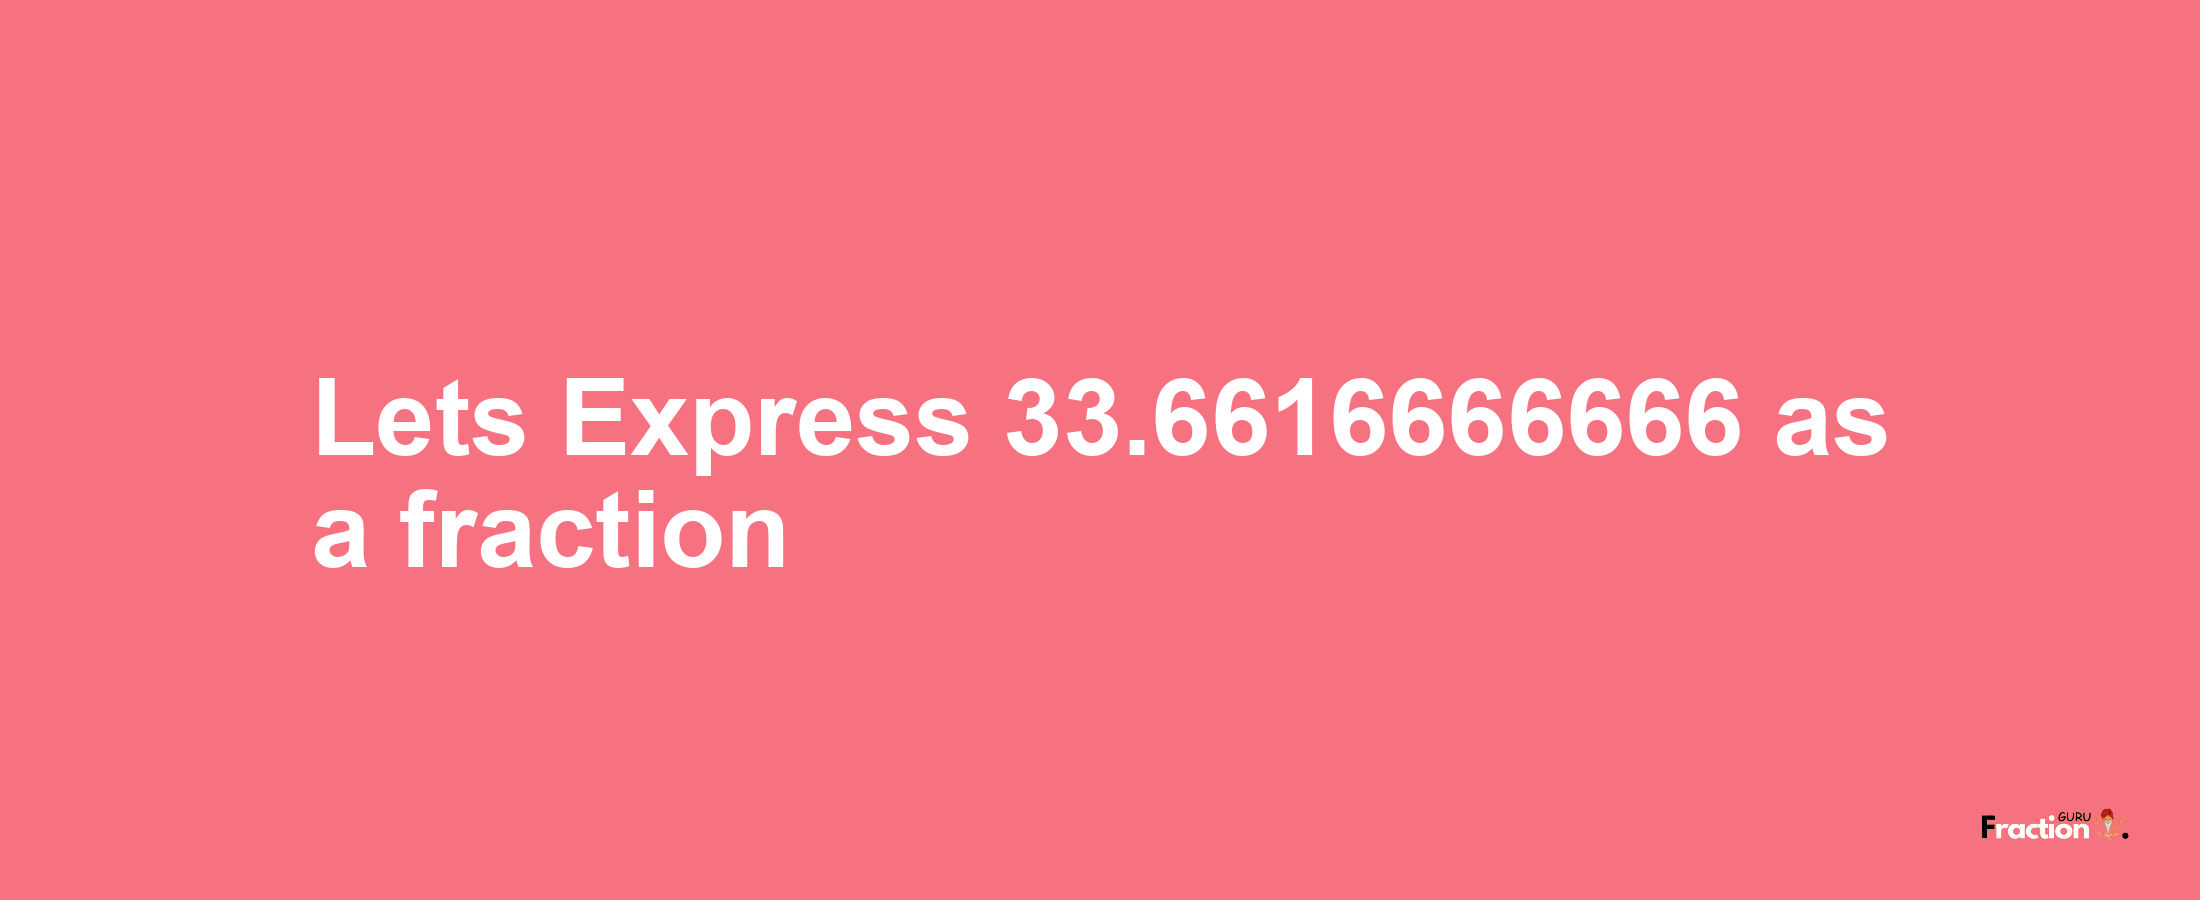 Lets Express 33.6616666666 as afraction